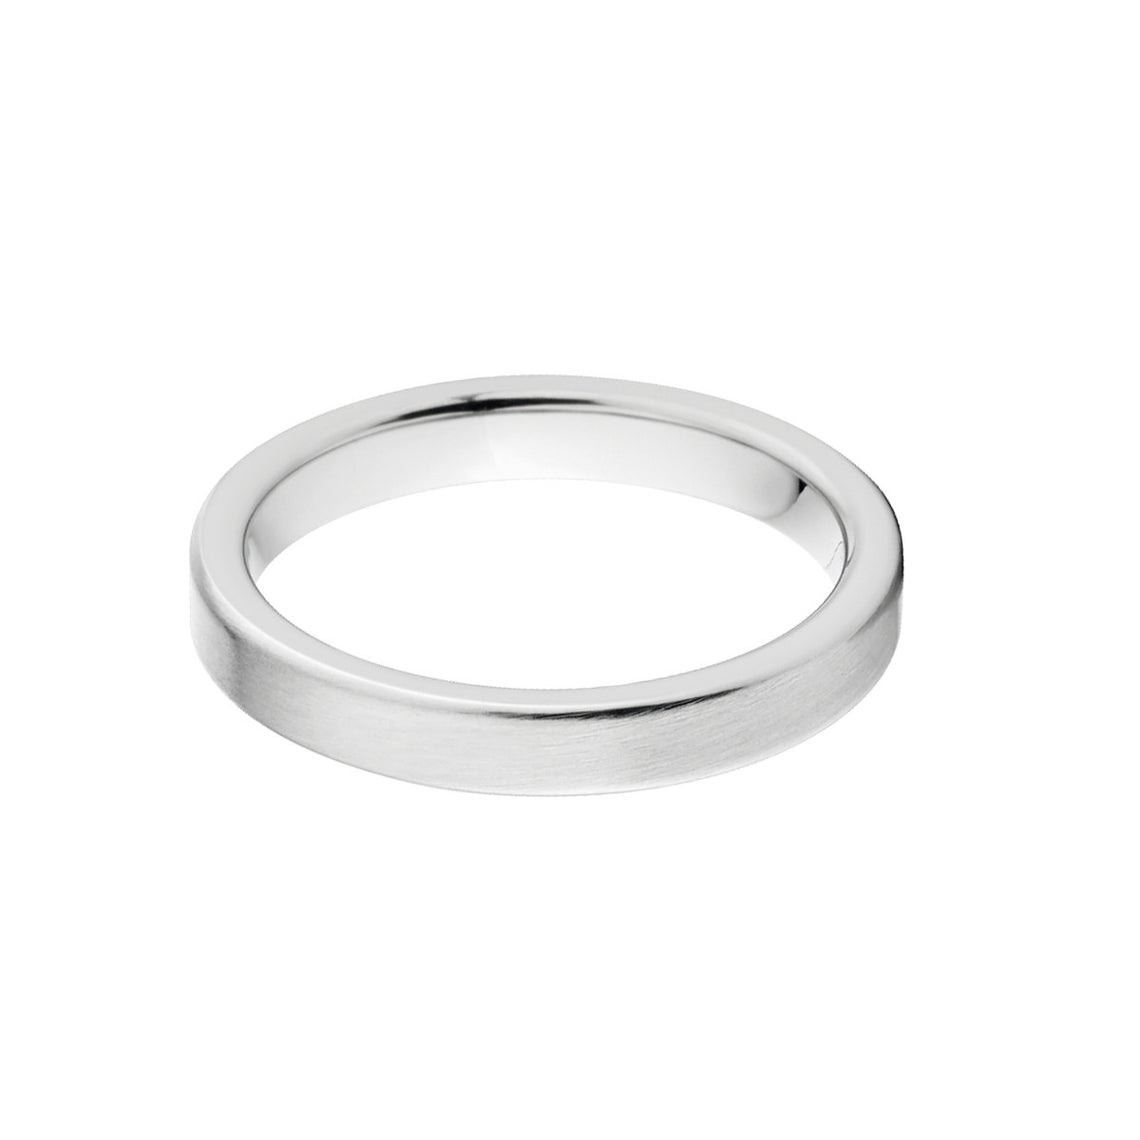 3mm wide cobalt wedding ring with a polish finish and flat profile